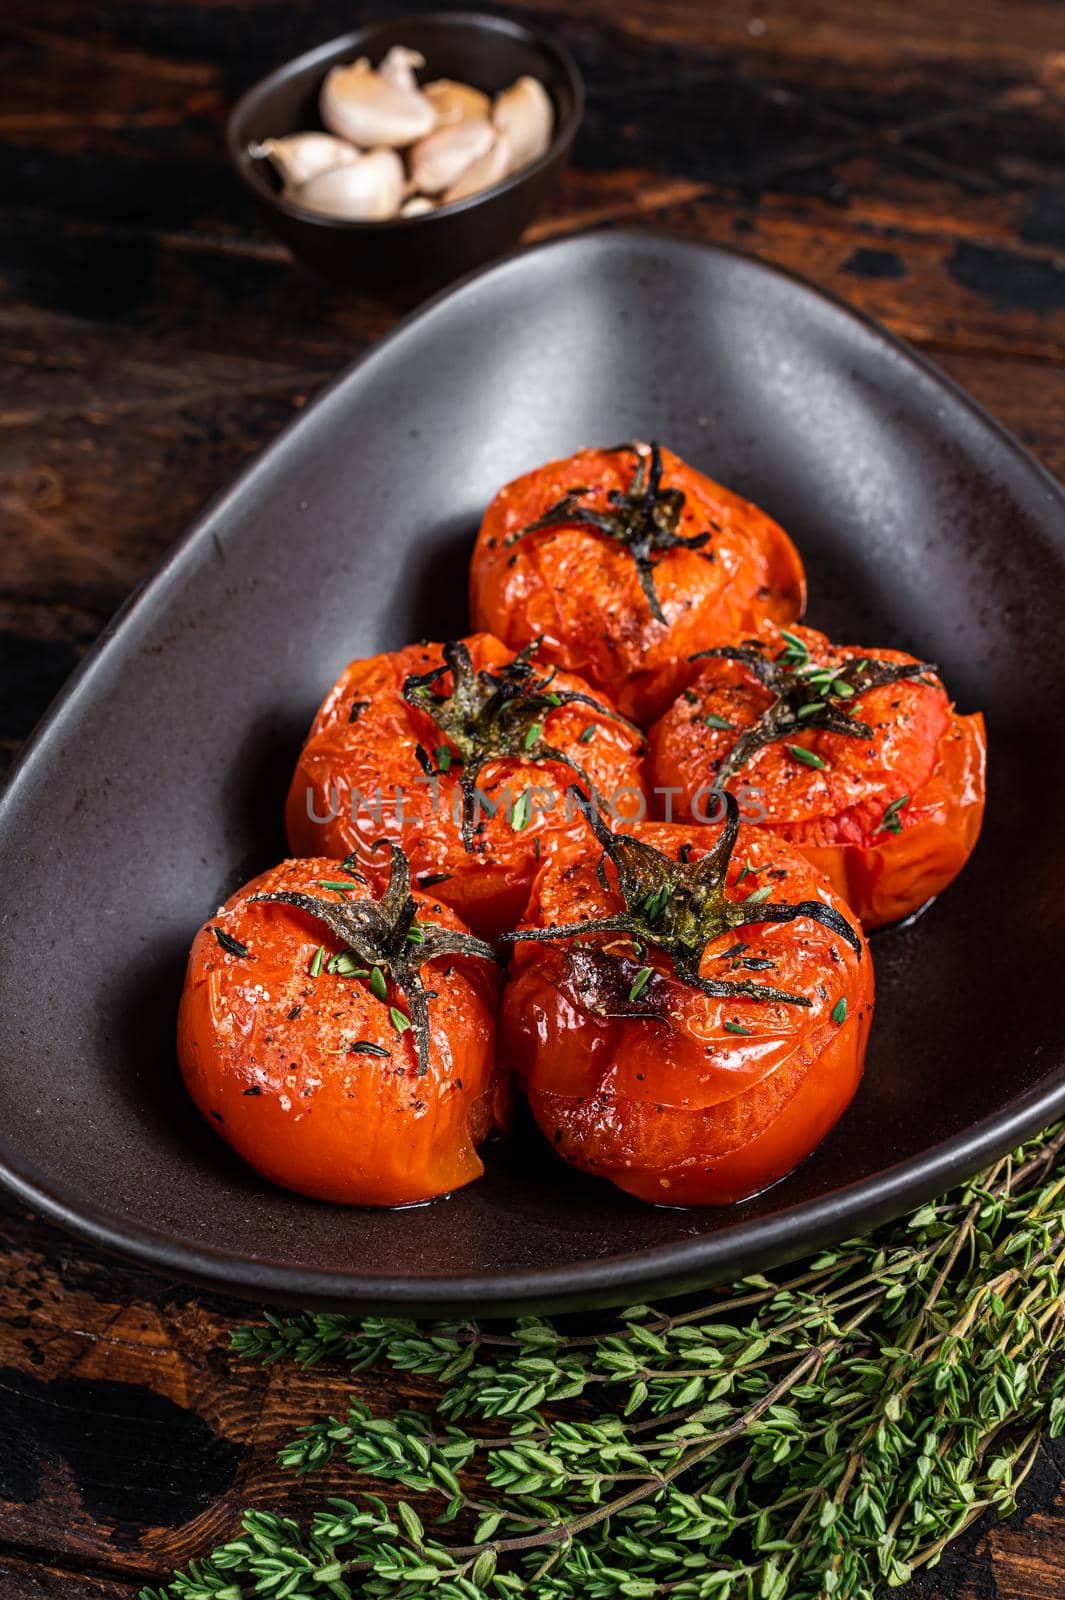 Oven Roasted cherry tomatoes with thyme and garlic in a plate. Dark wooden background. Top view by Composter